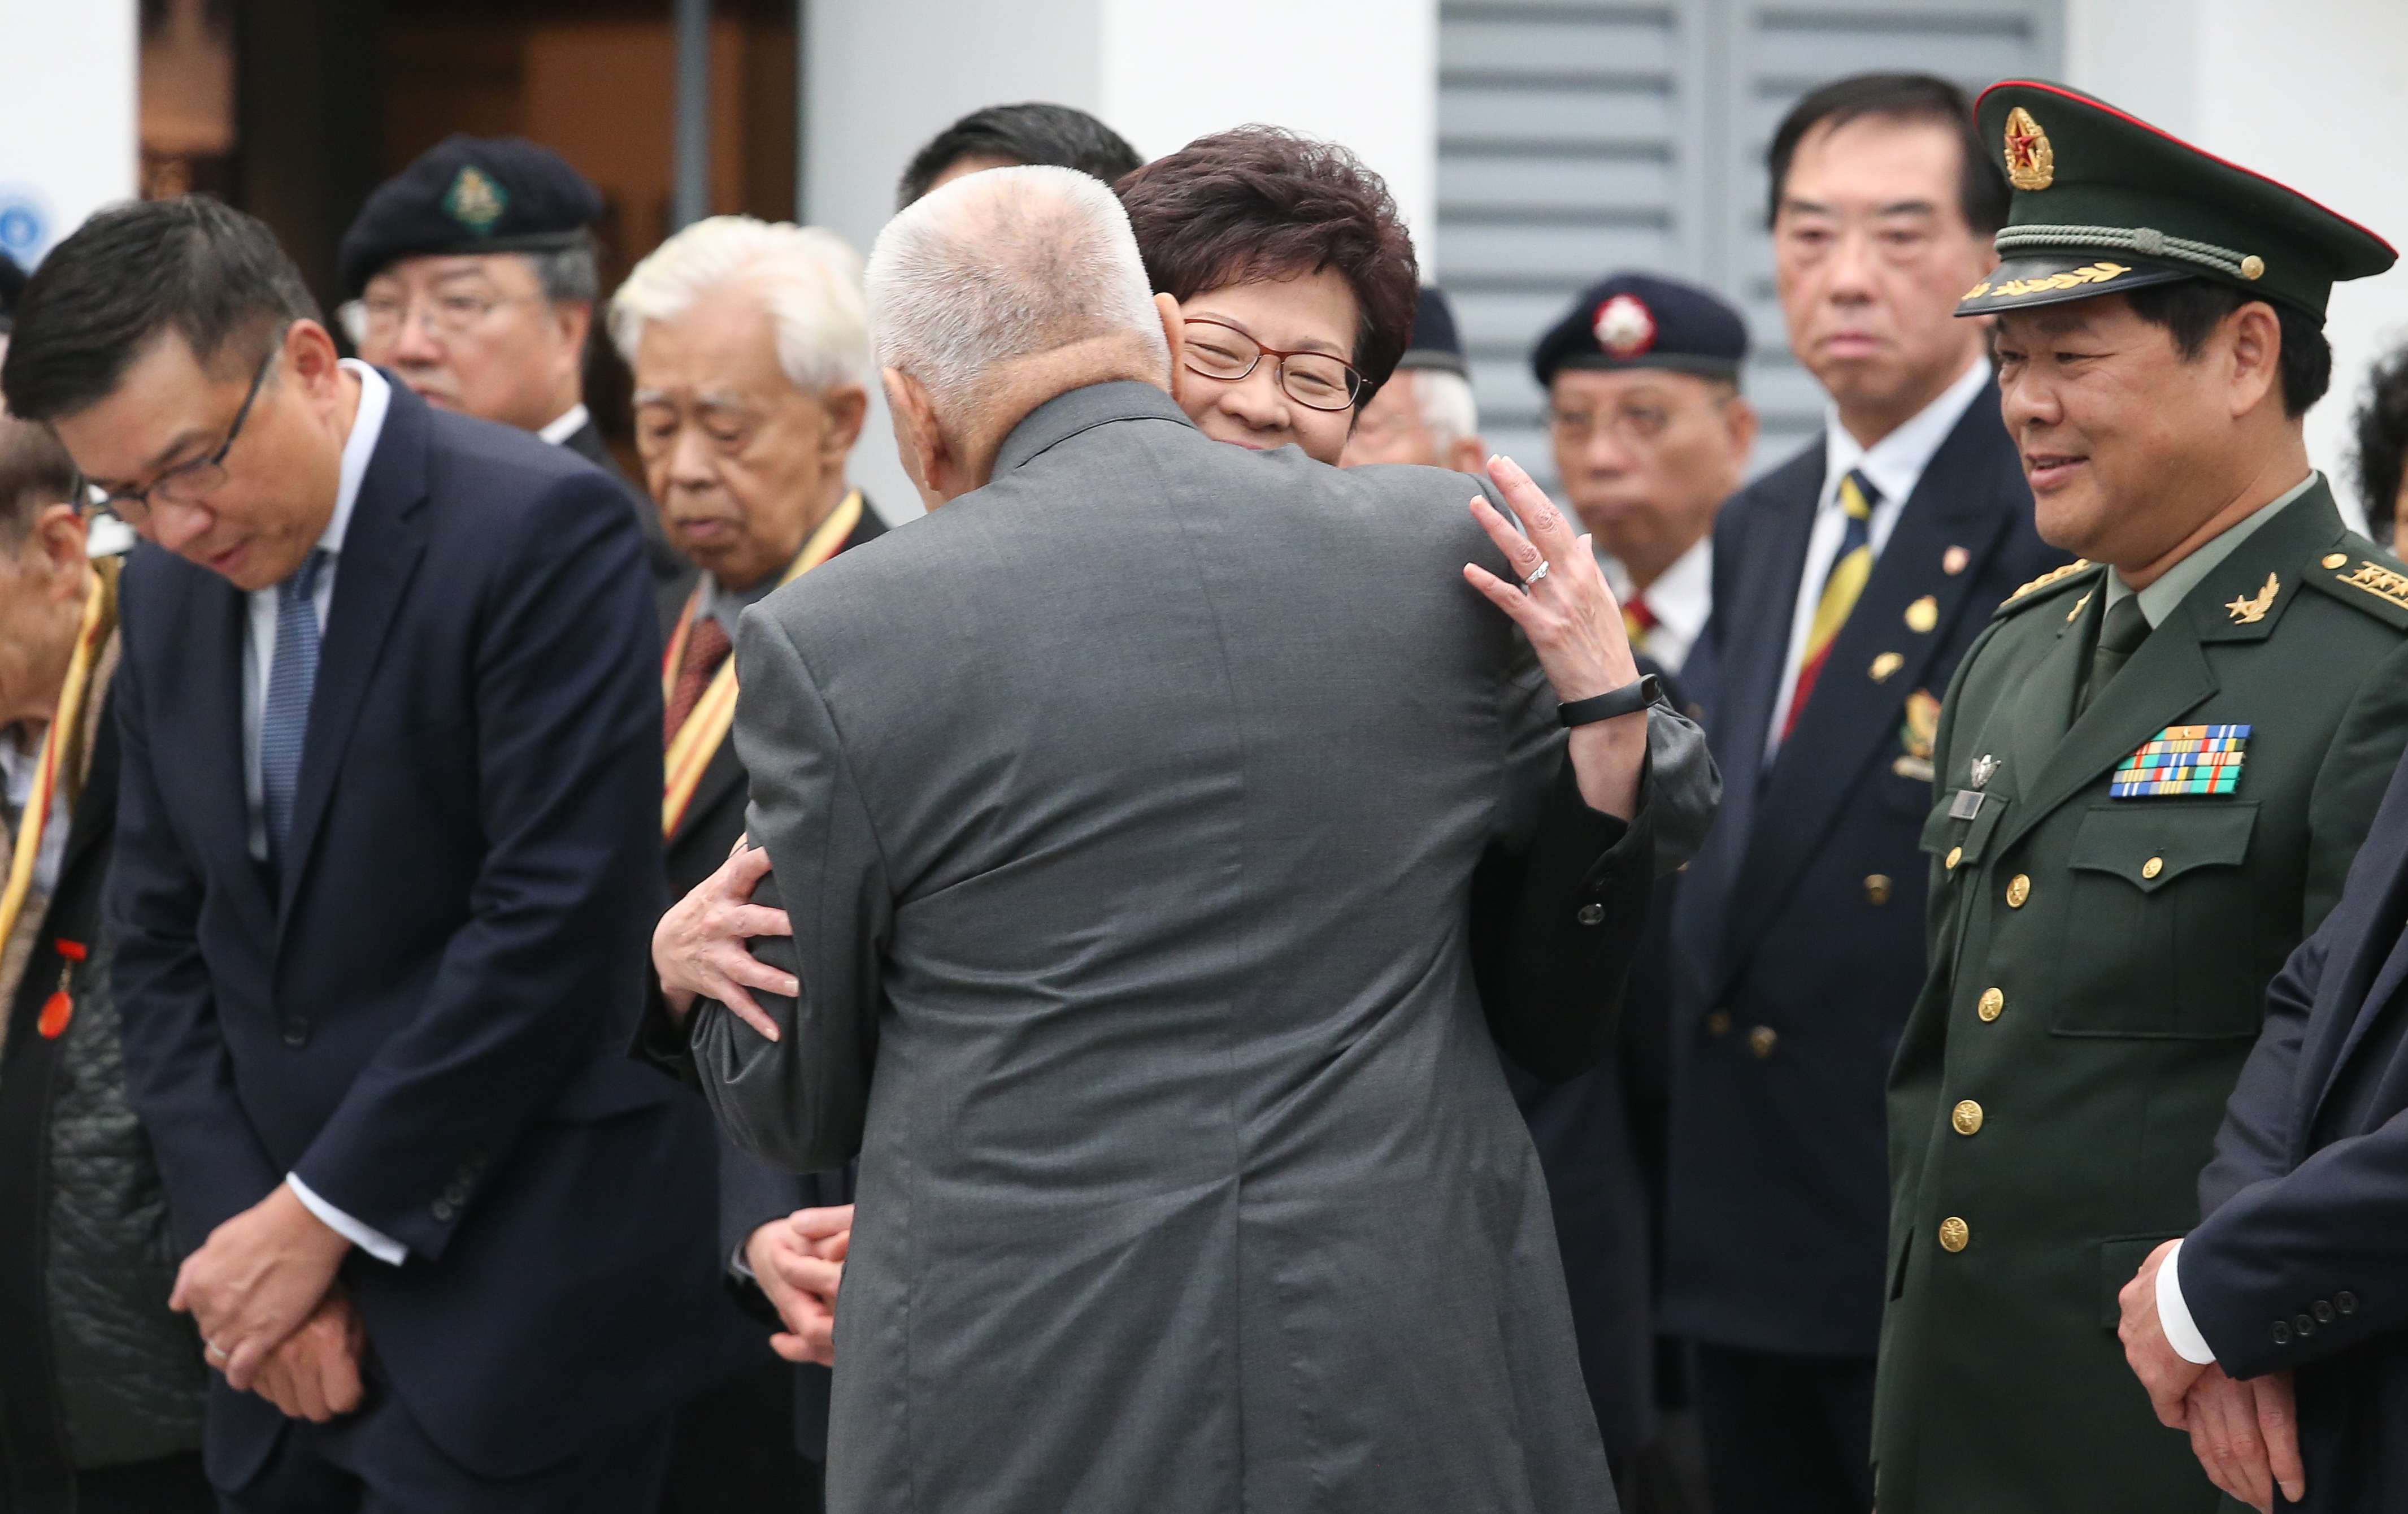 Former chief executive Tung Chee-hwa gives Chief Secretary Carrie Lam a hug during the official ceremony in Shau Kei Wan to commemorate the Nanking massacre. Photo: K. Y. Cheng